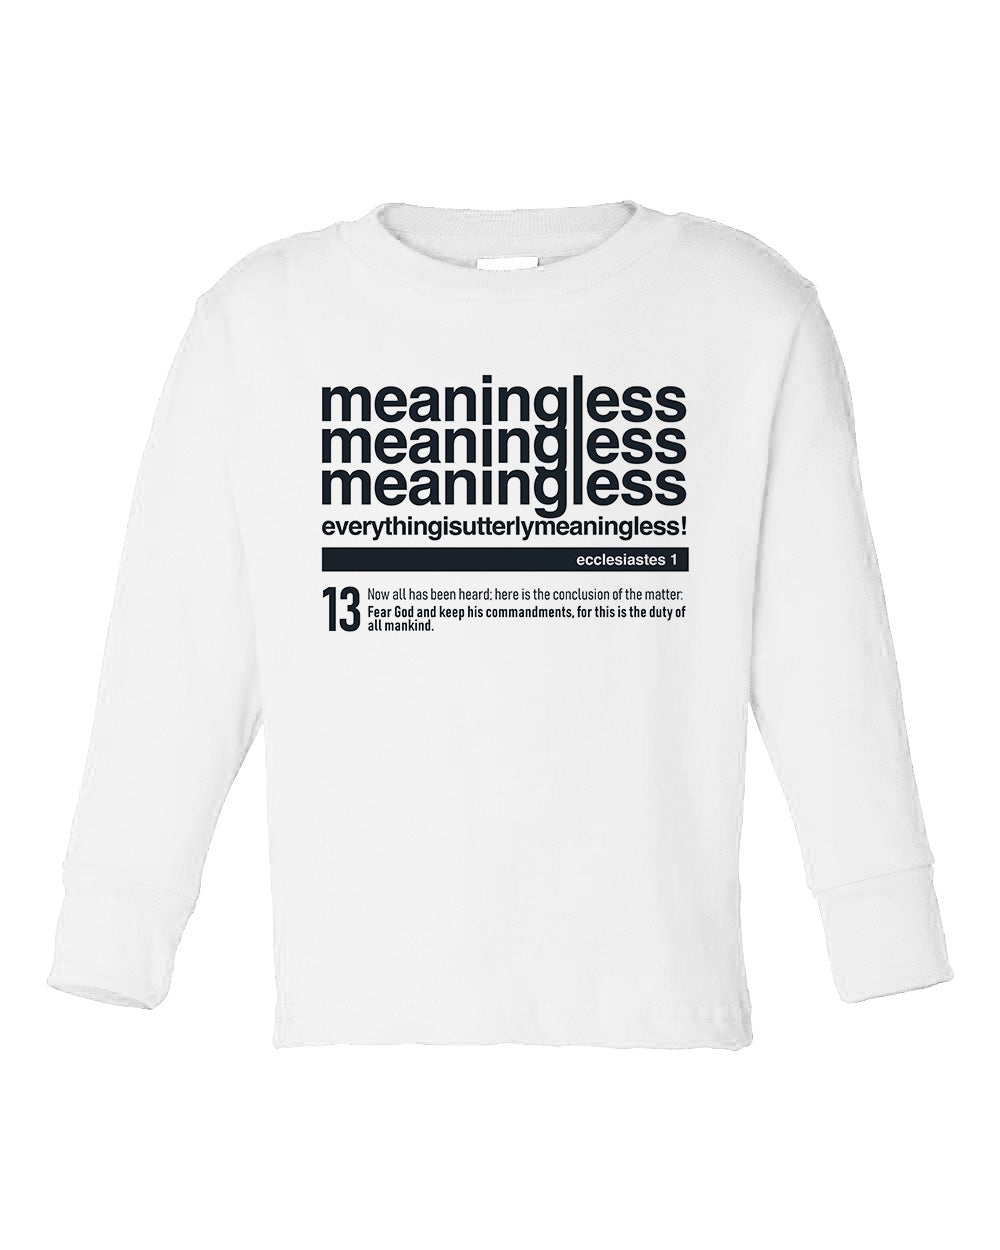 Meaningless 3 Toddler Long Sleeve